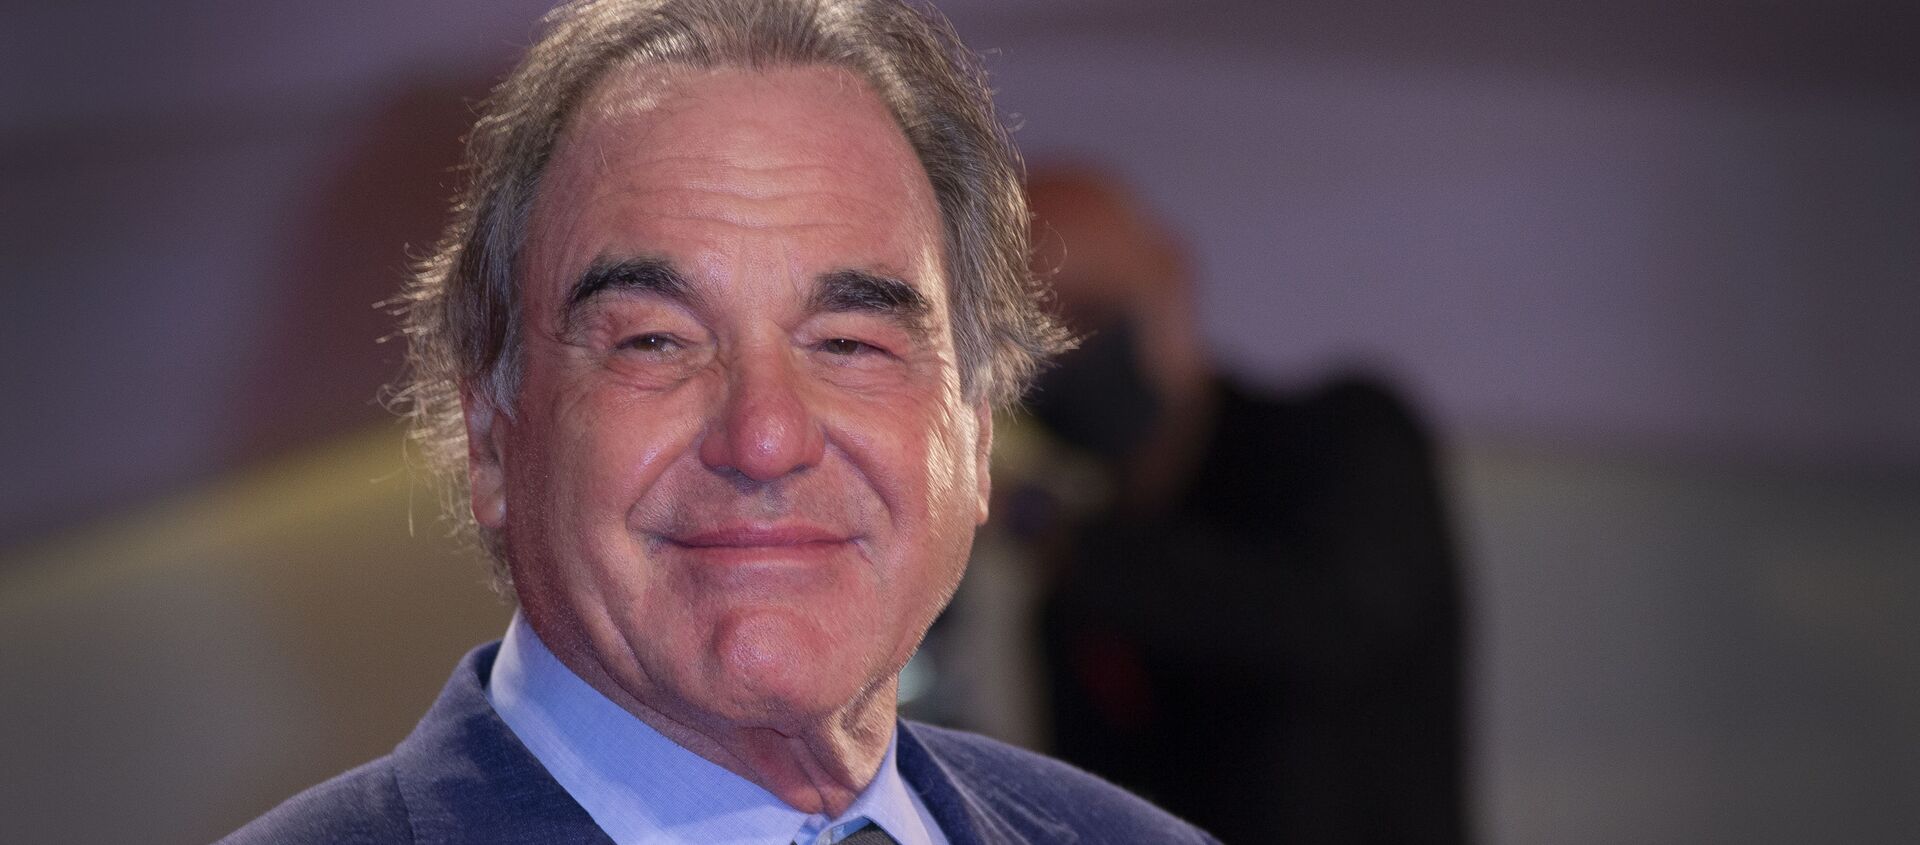 Oliver Stone poses for photographers upon arrival at the premiere of the film 'Miss Marx' during the 77th edition of the Venice Film Festival in Venice, Italy, Saturday, Sept. 5, 2020.  - Sputnik International, 1920, 15.12.2020